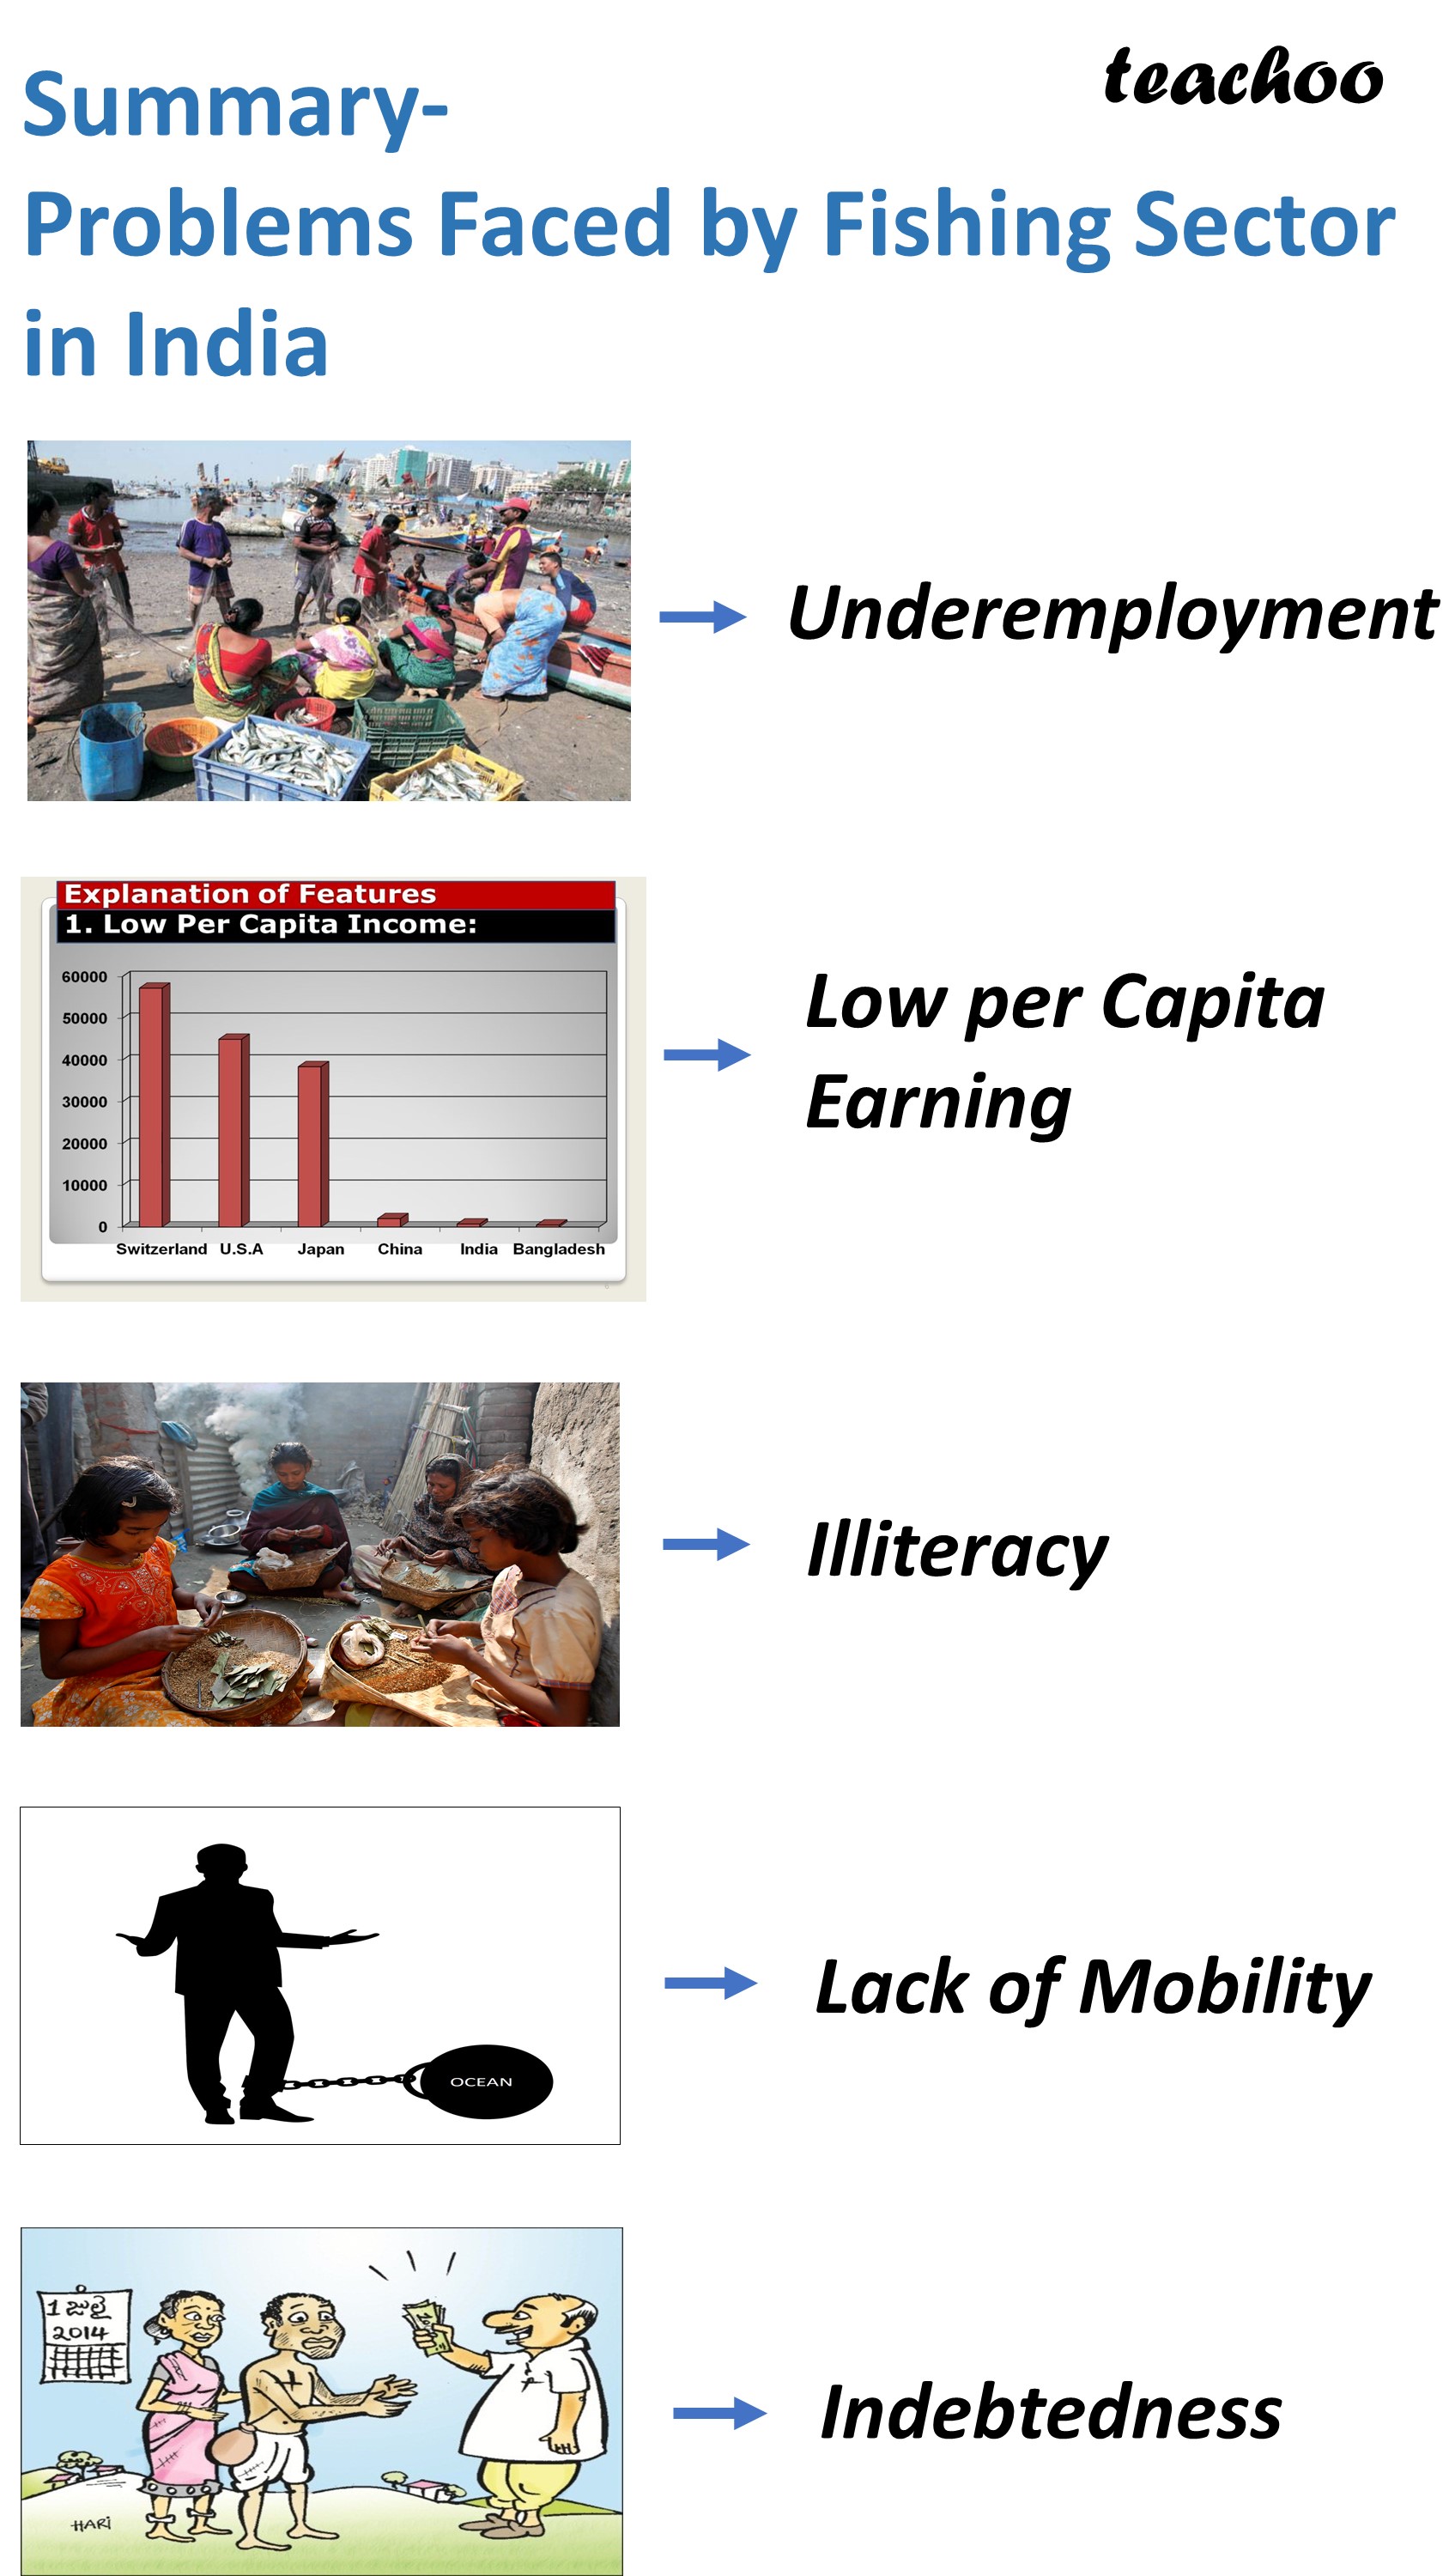 Summary-Problems Faced by Fishing Sector in India - Teachoo.JPG